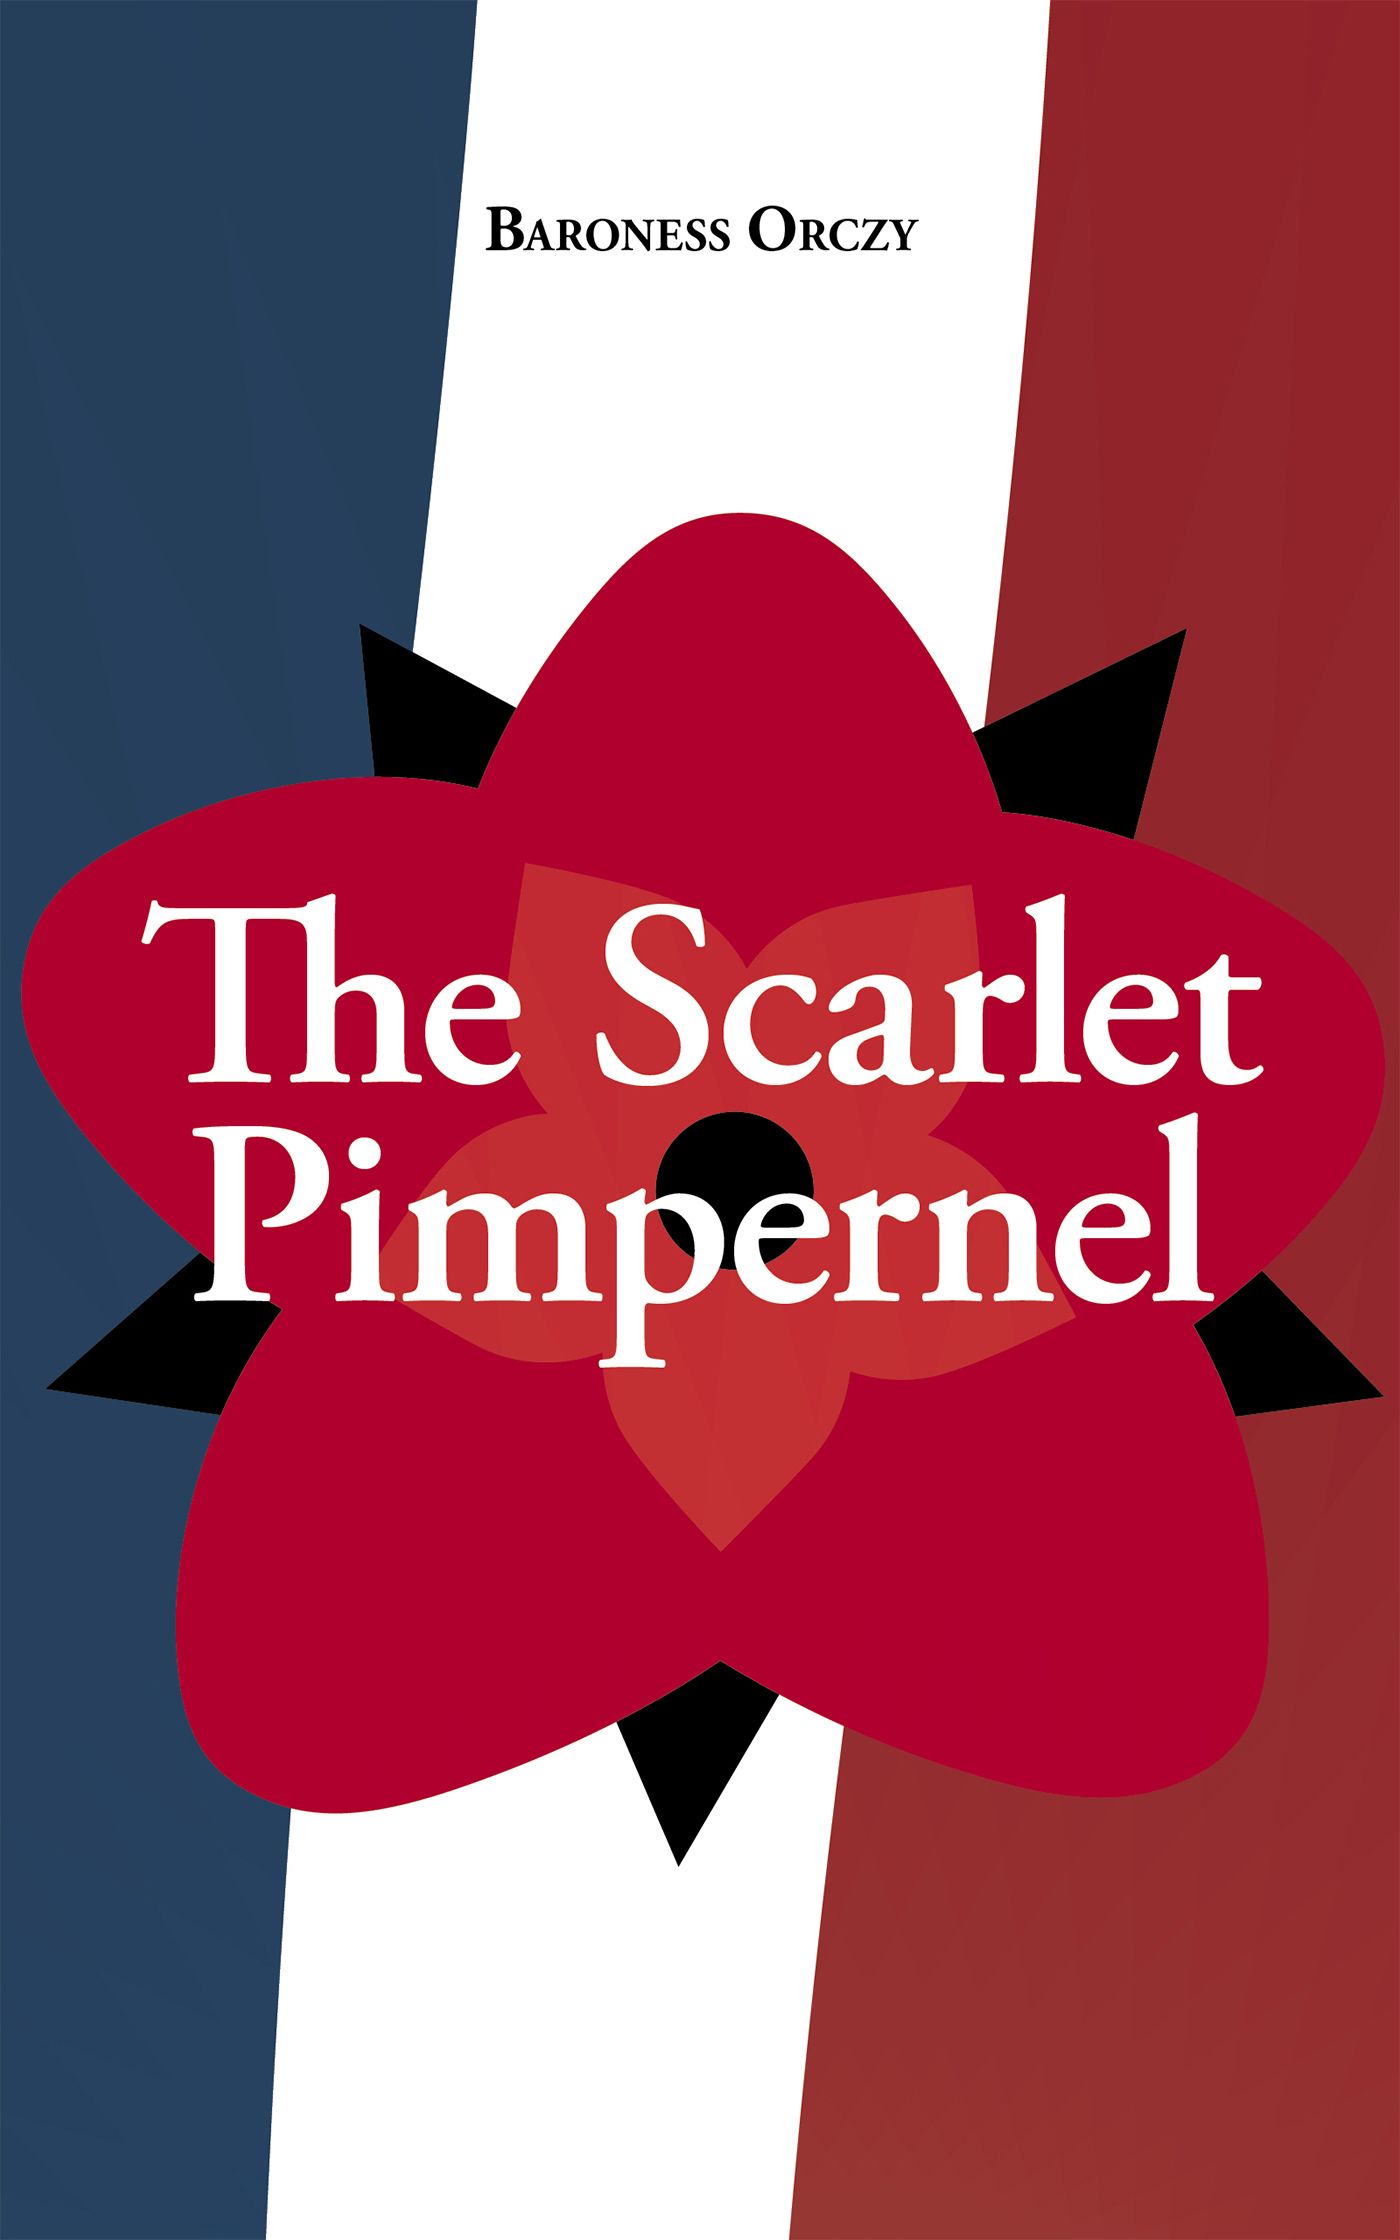 The Scarlet Pimpernel, eBook by Emma Orczy